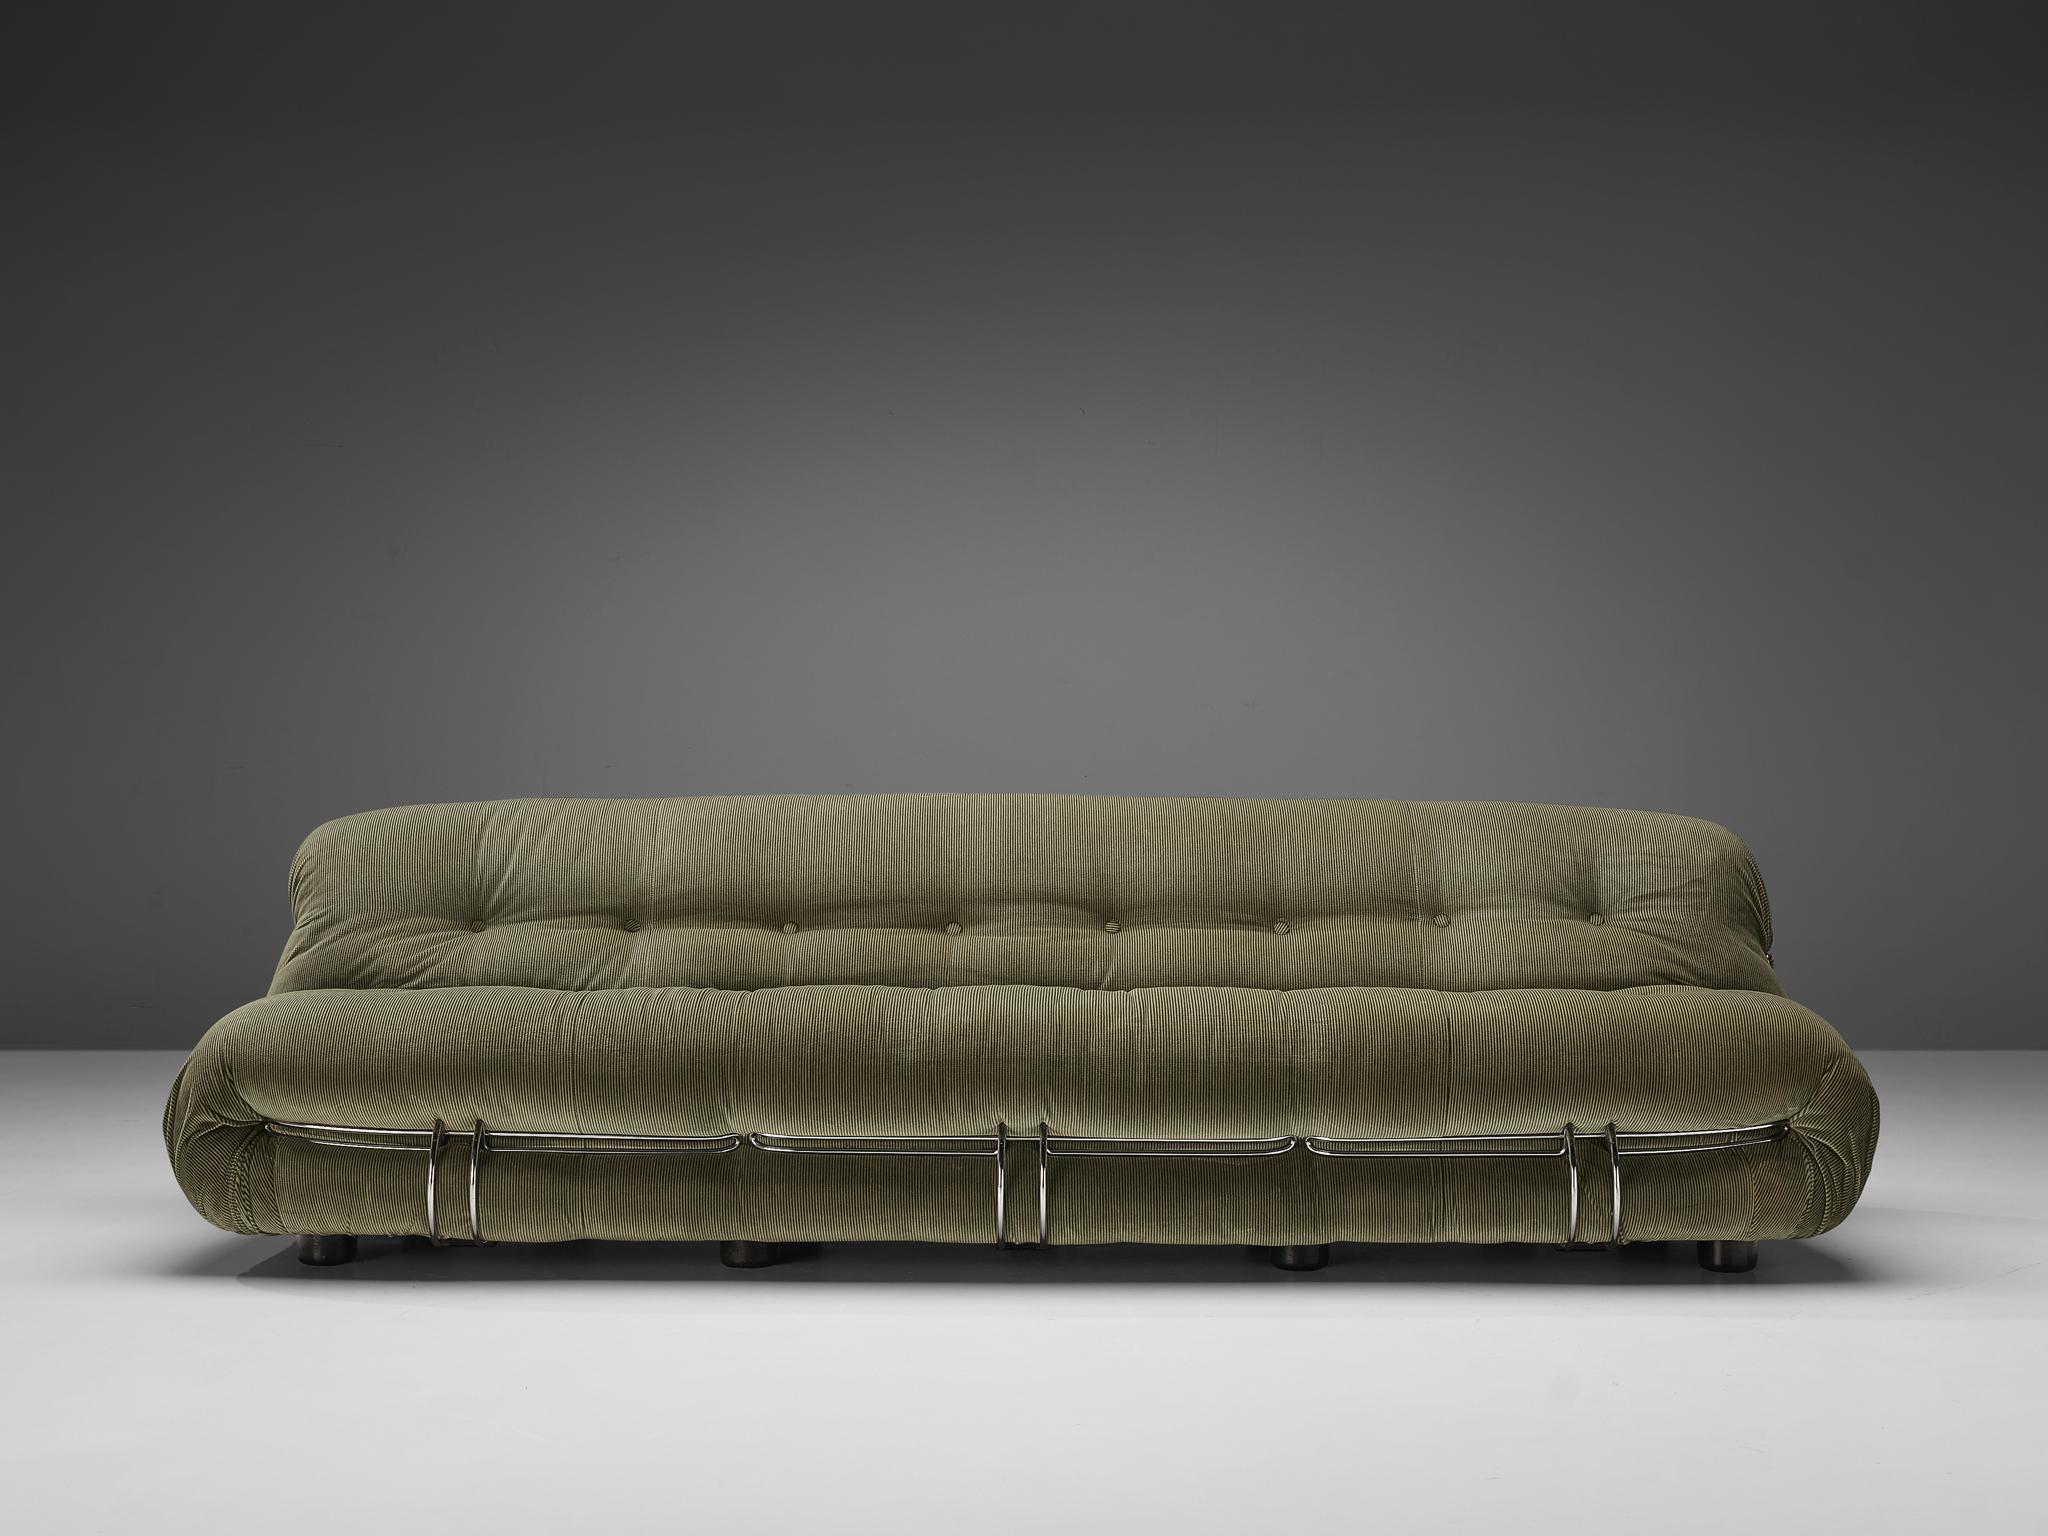 Afra & Tobia Scarpa for Cassina, 'Soriana' sofa, soft green fabric, metal, Italy, 1969 

Iconic sofa by Italian designer couple Afra & Tobia Scarpa. The ‘Soriana’ proposes a model that institutionalizes the image of the informal sitting where